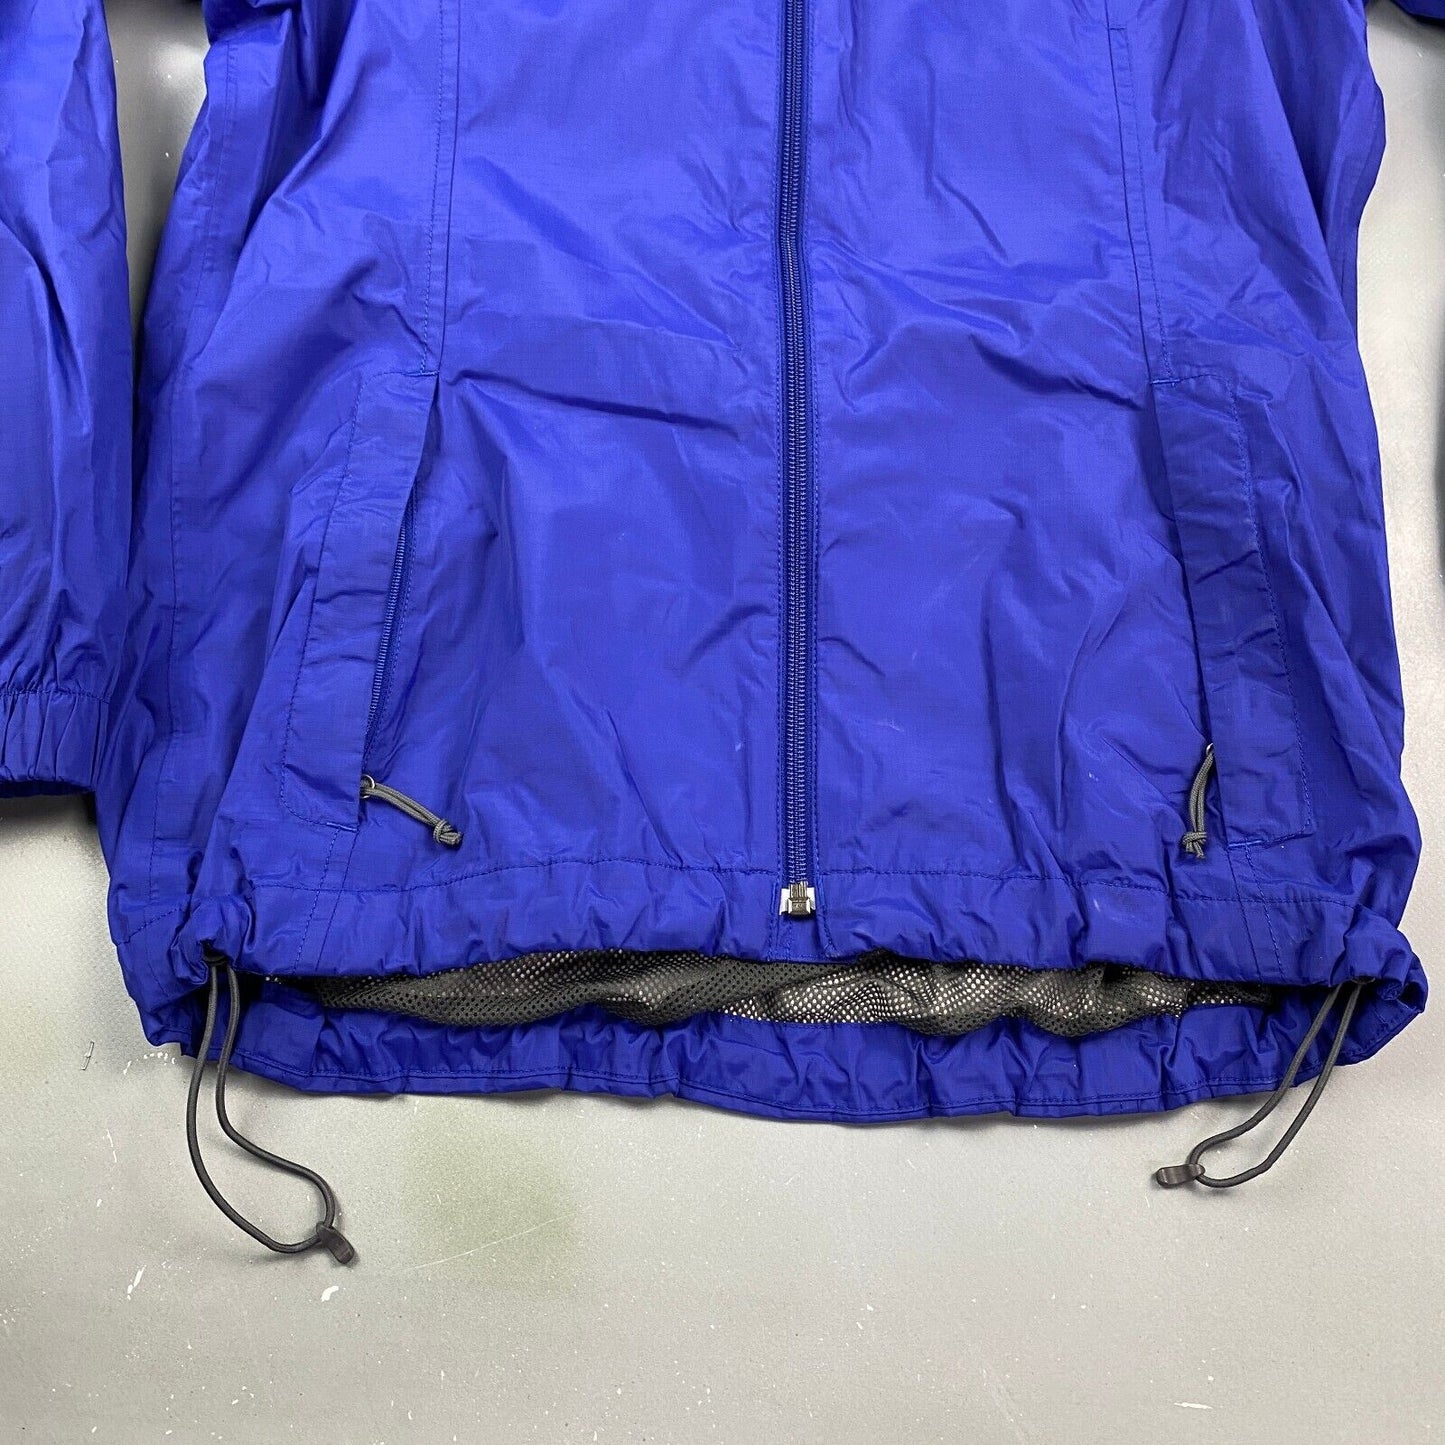 VINTAGE The North Face Hyvent Blue Shell Windbreaker Jacket sz Small Womens